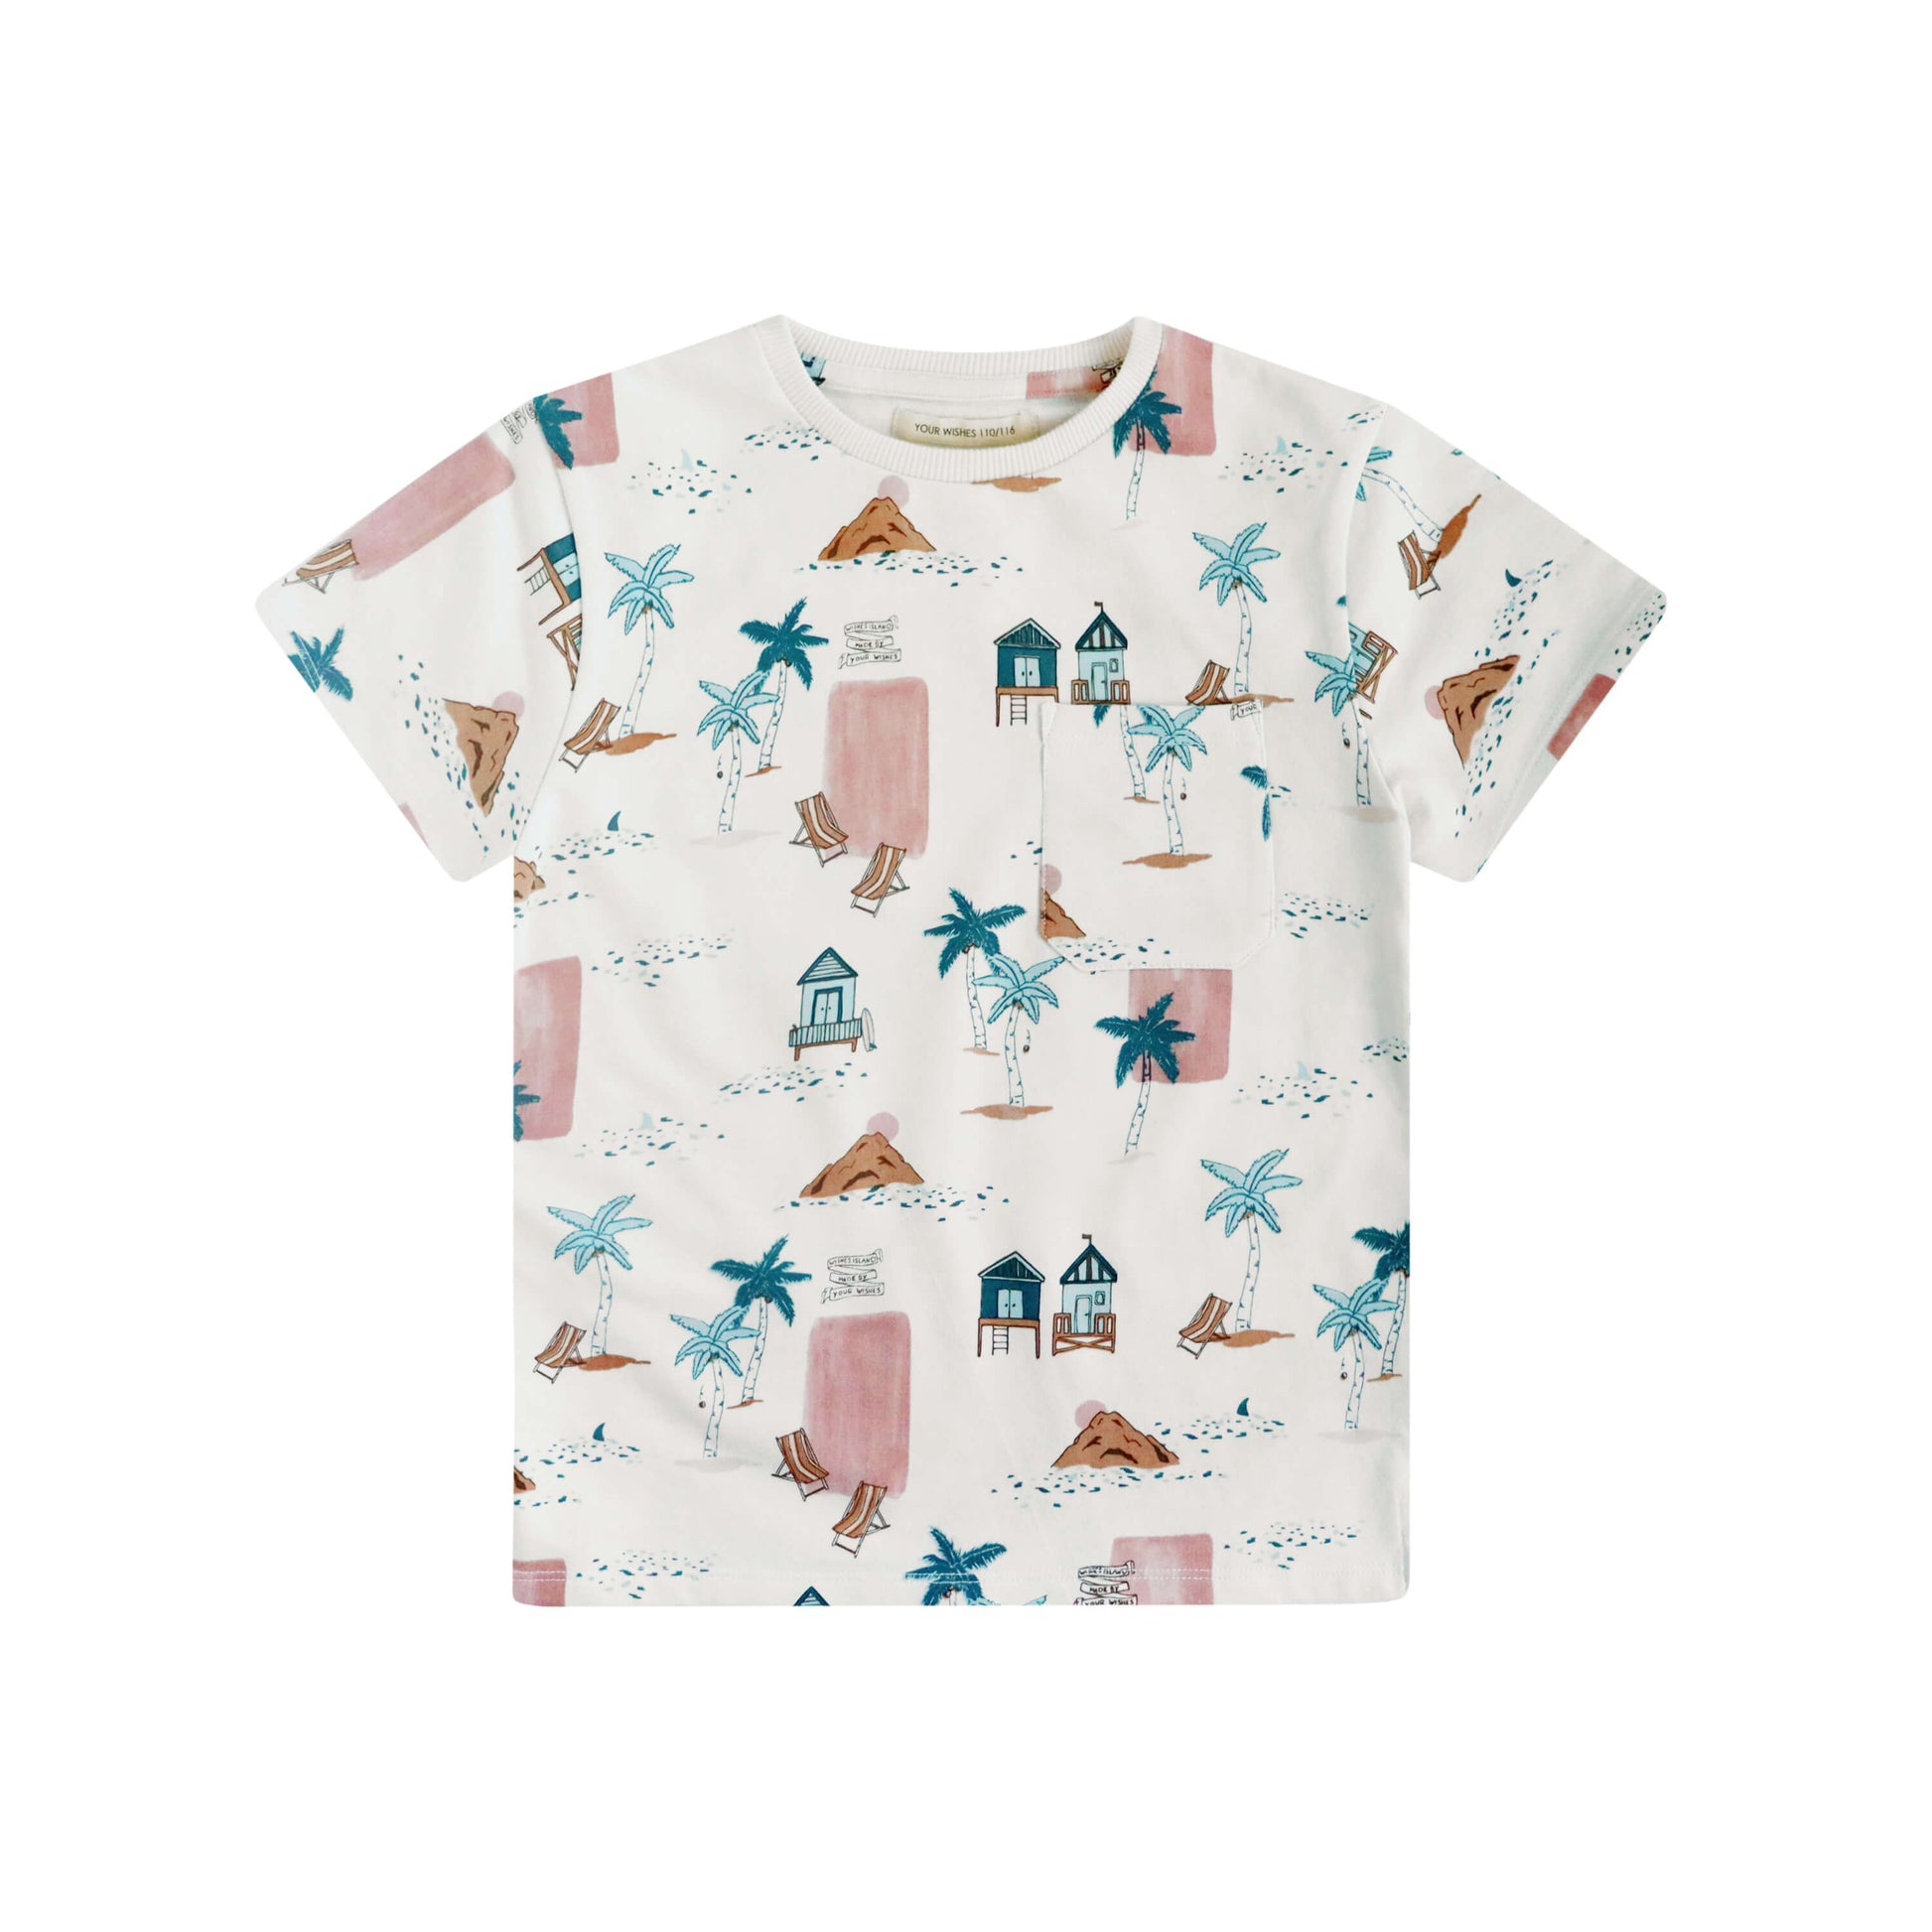 Your Wishes Beach Life Espen - Kinder Shirt - Multicolor1